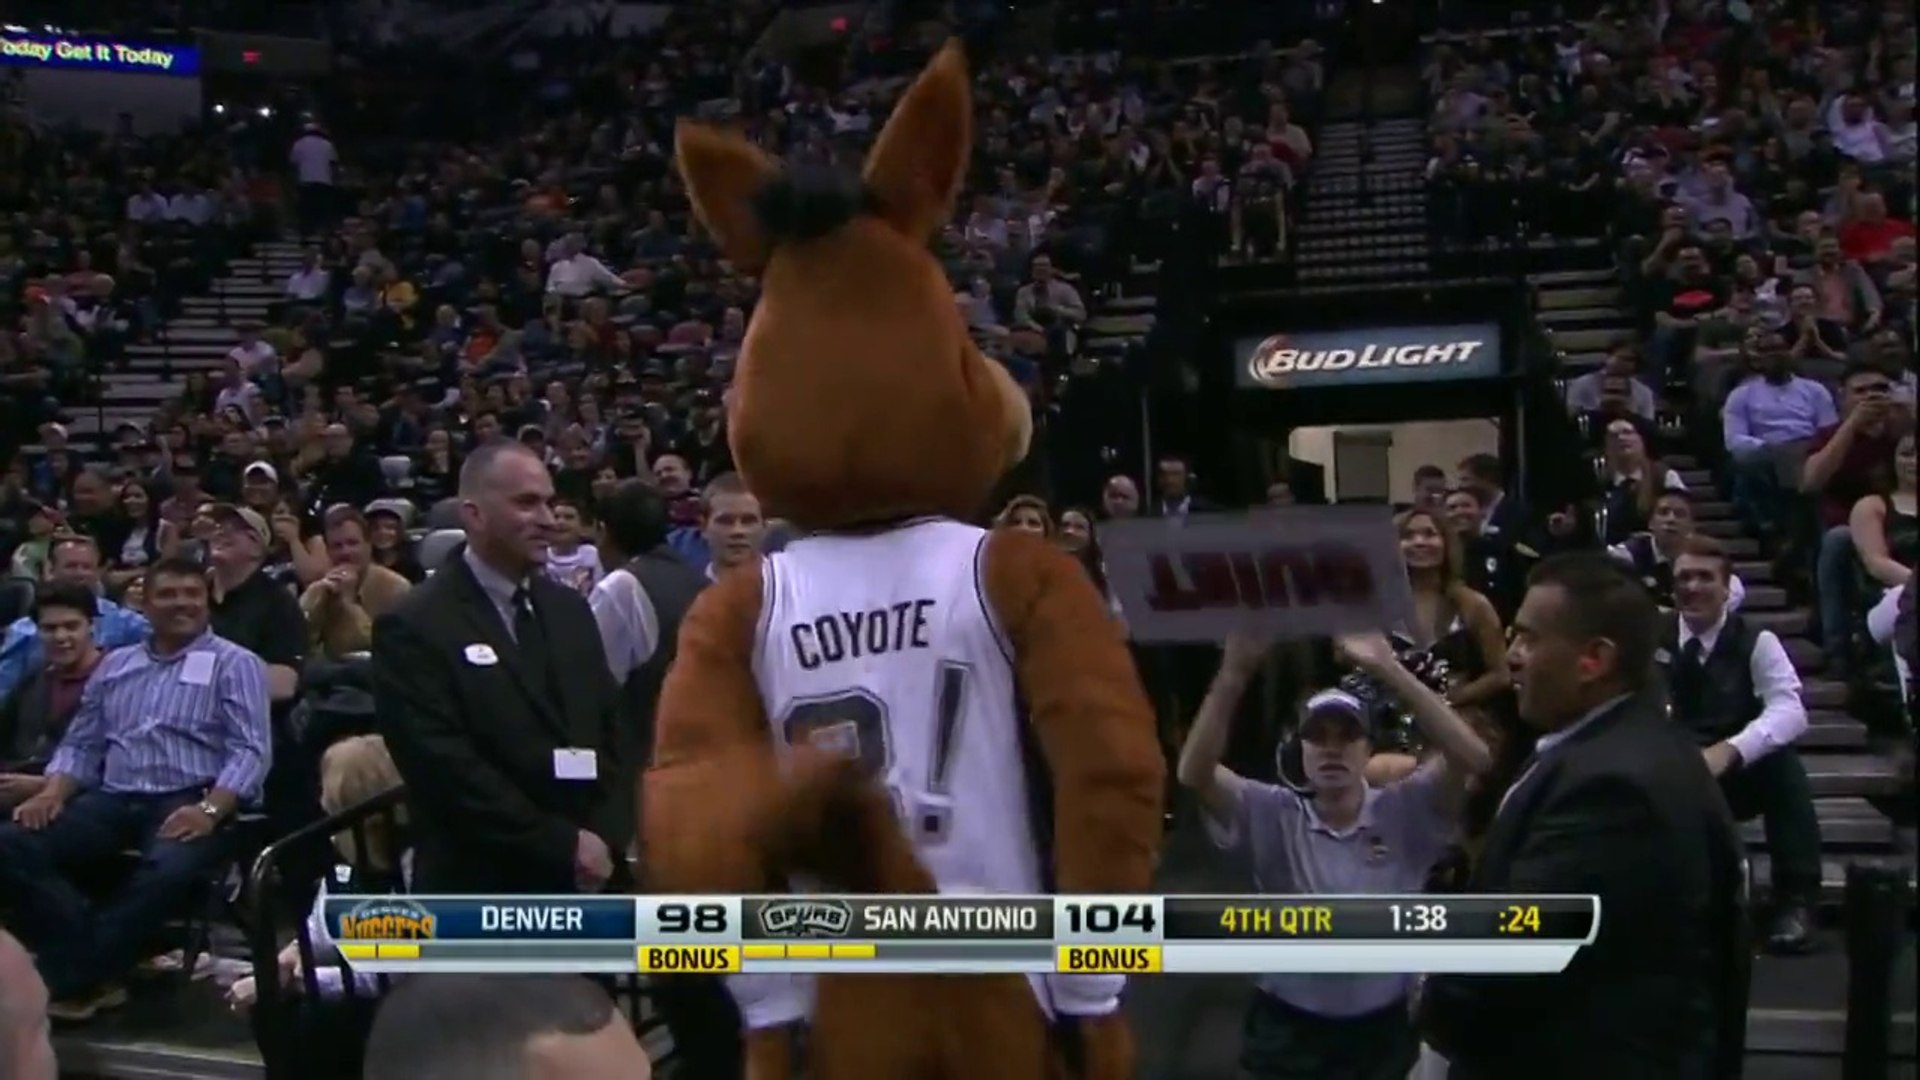 Inside Coyote's Den: Exclusive behind-the-scenes look at Spurs iconic mascot